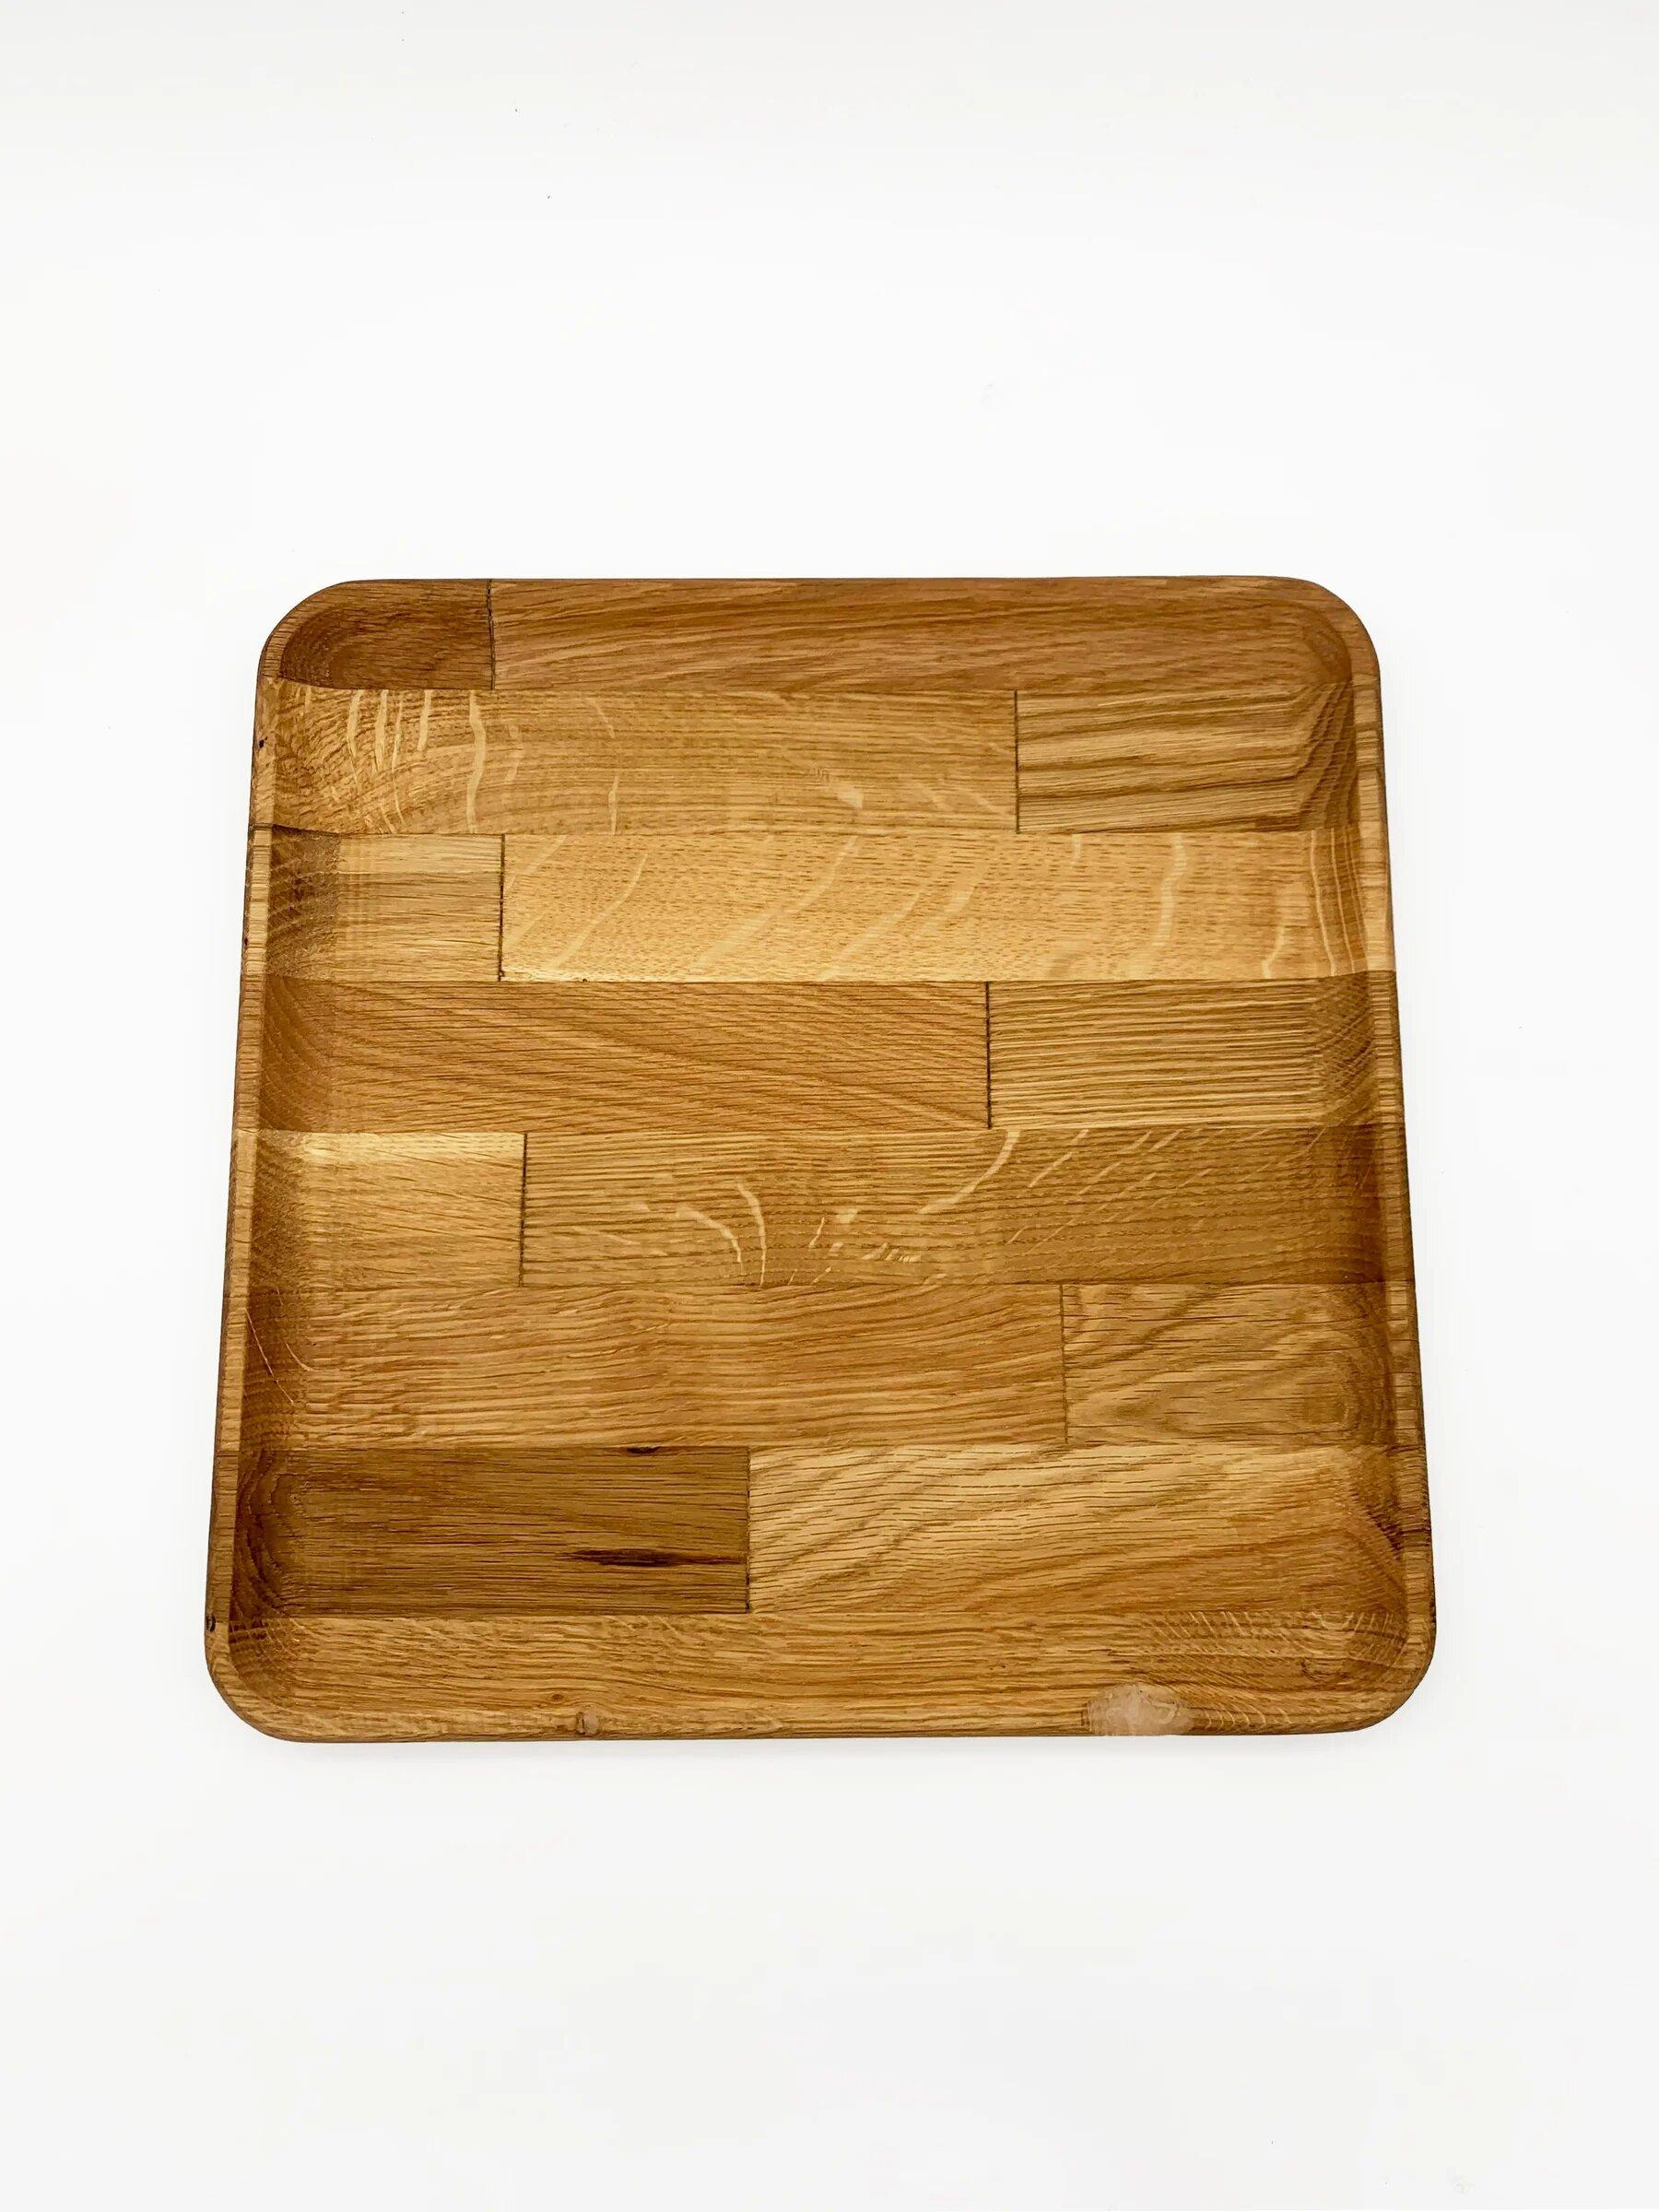 Country Squared Tray For Sale